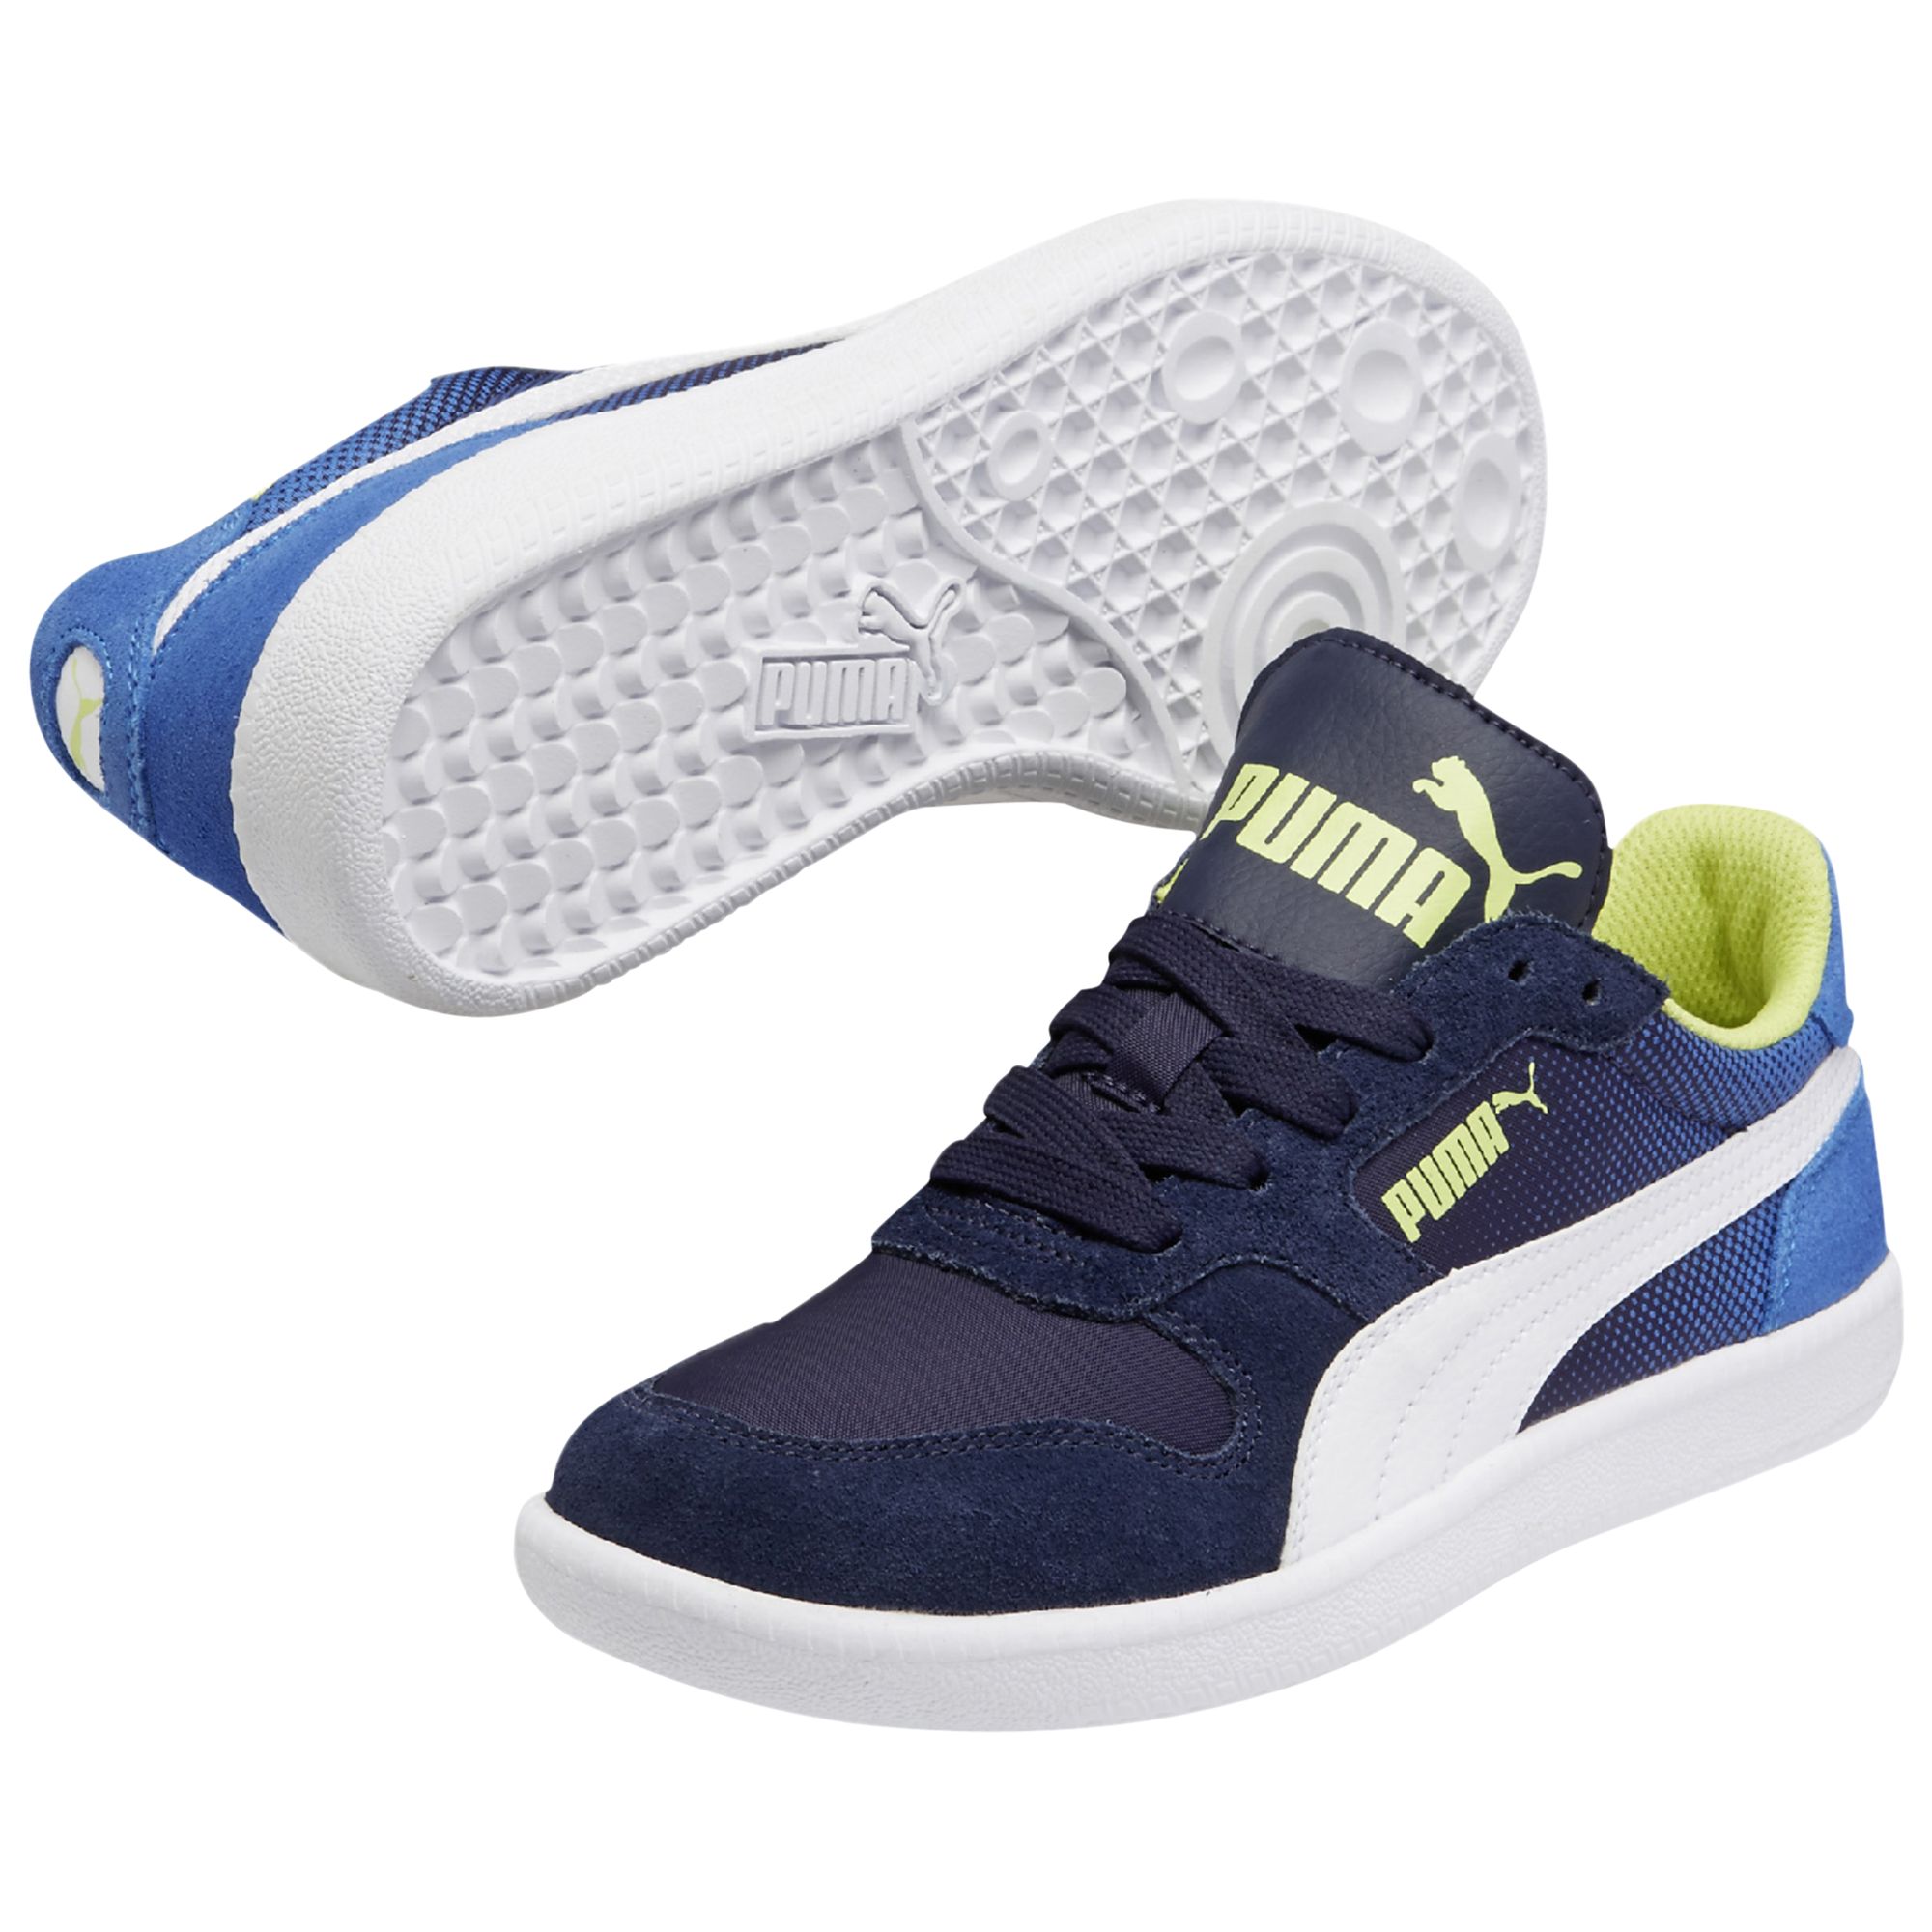 Puma Children's Icra Suede Trainers, Peacoat Blue at John Lewis & Partners